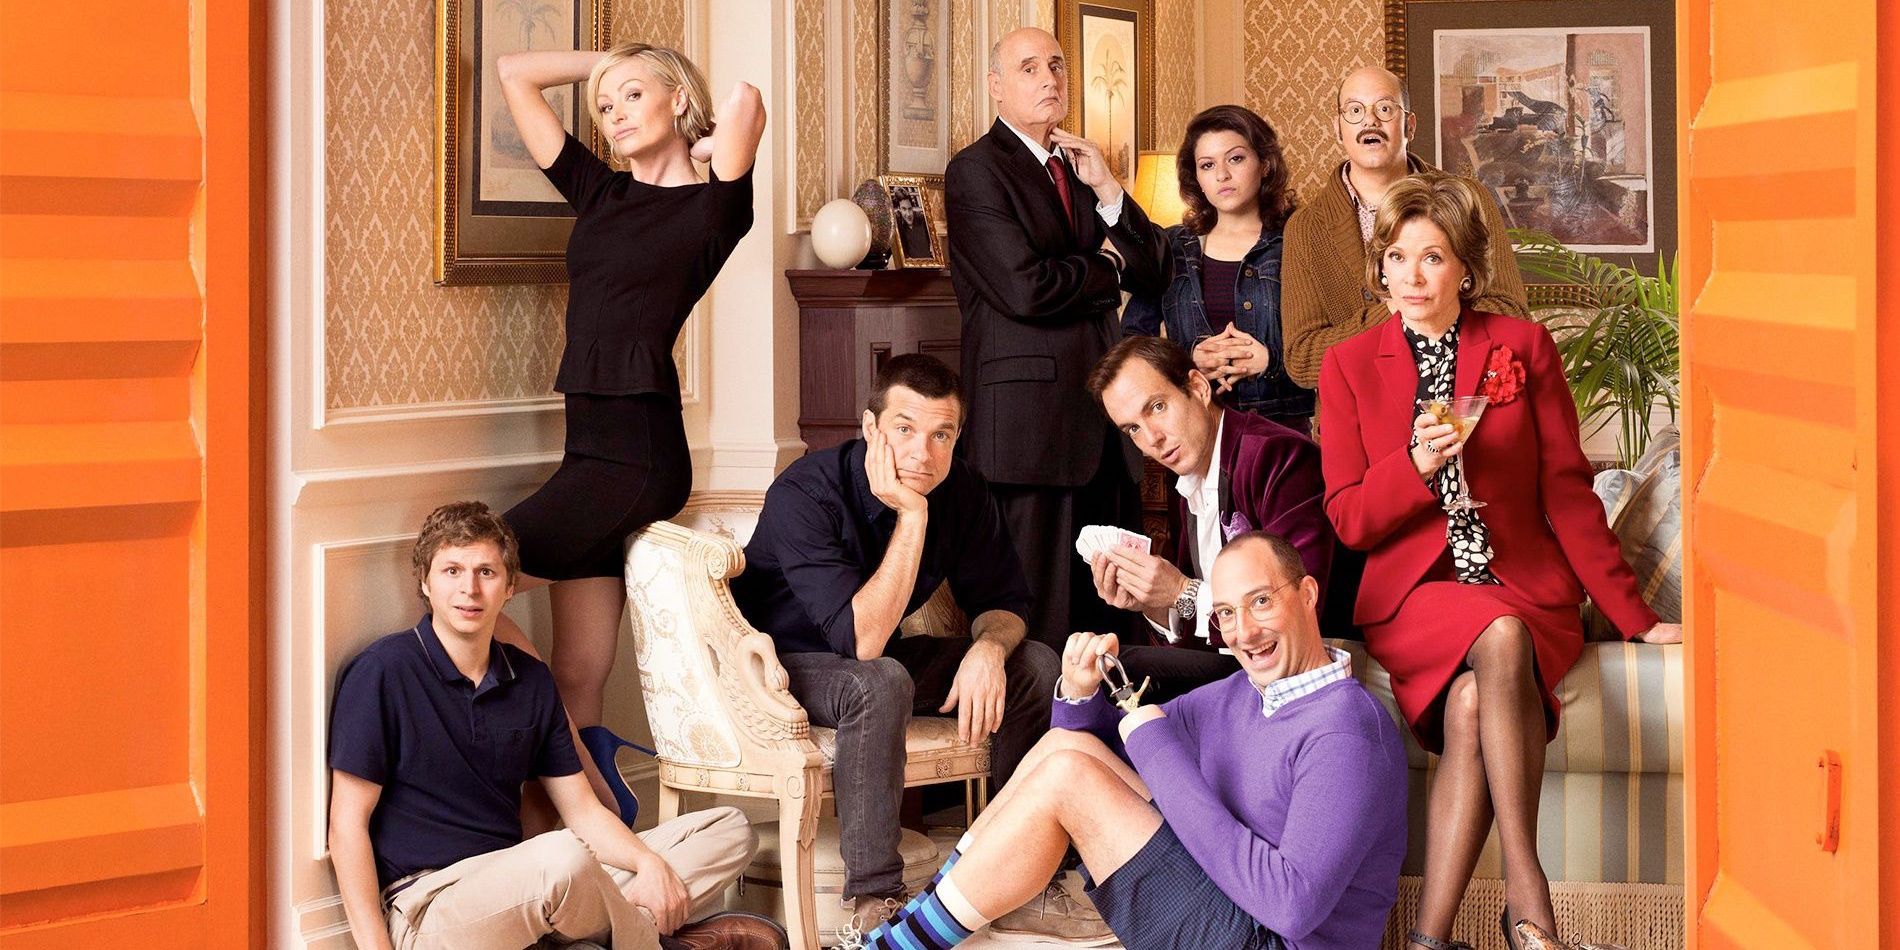 Why Arrested Development Is The Best Comedy Series Ever (& 5 Reasons Community Is Even Funnier)